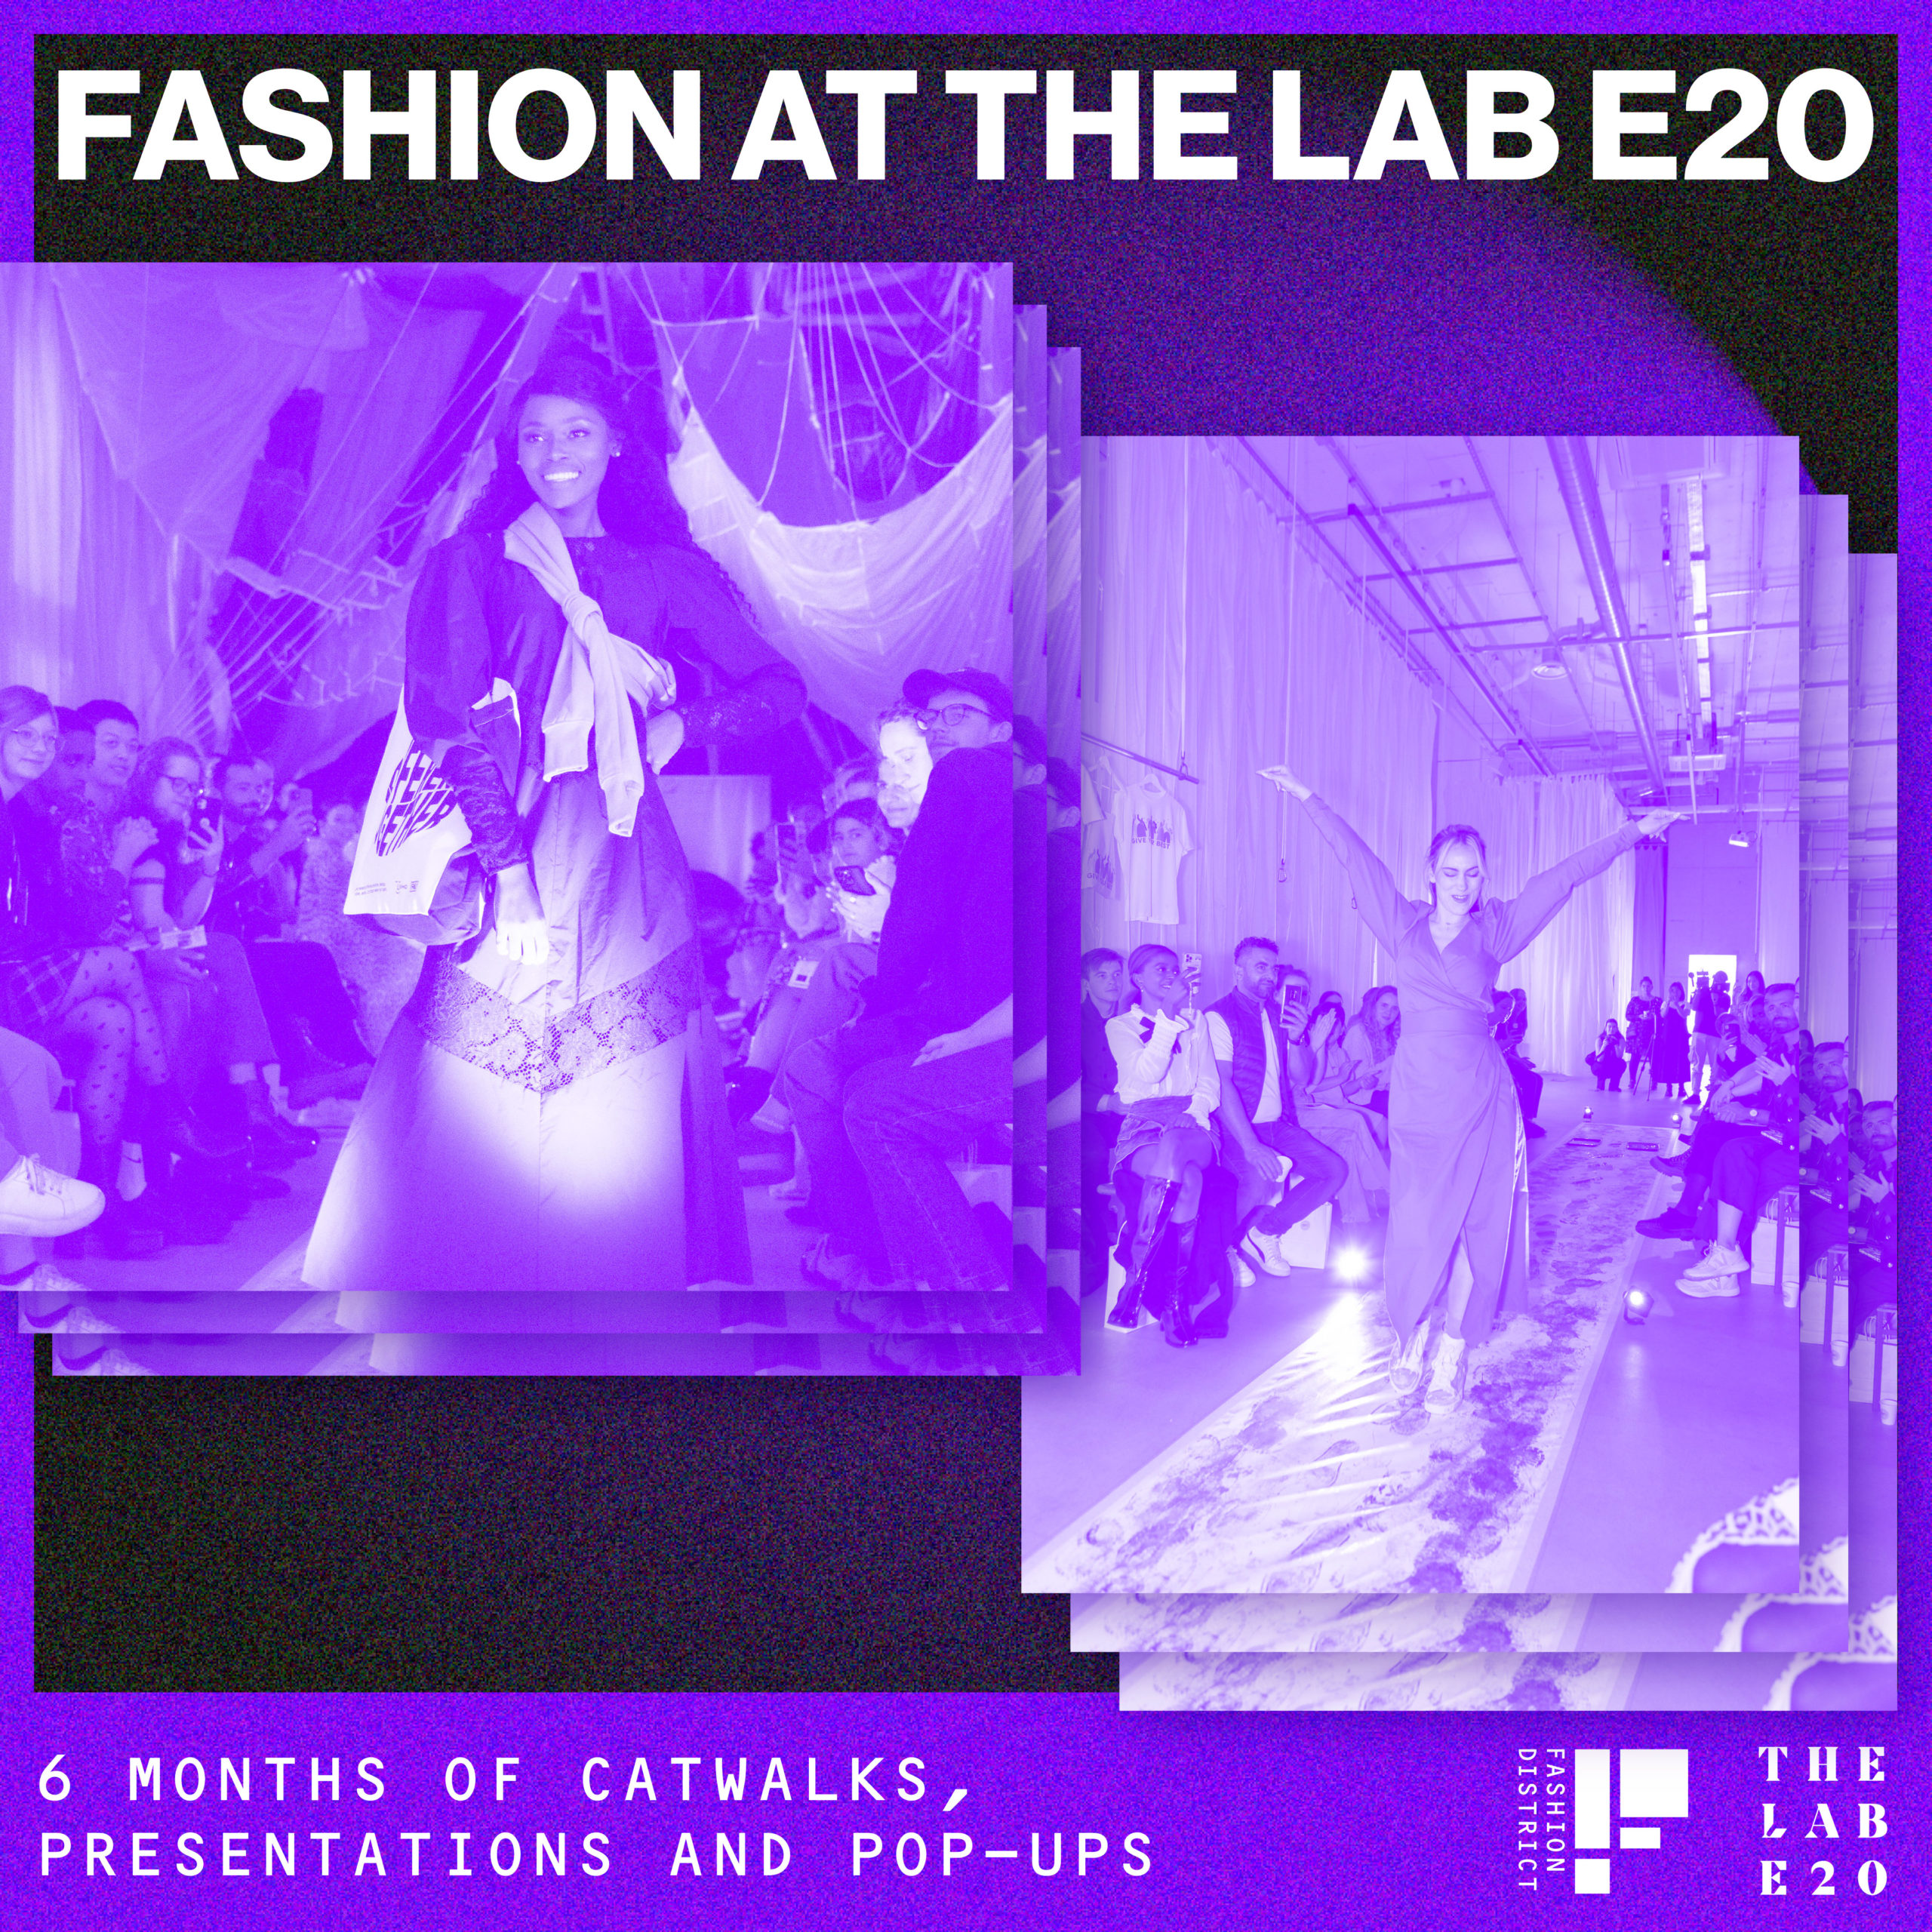 Fashion at The Lab E20: Catwalks, Presentations and Pop-Ups